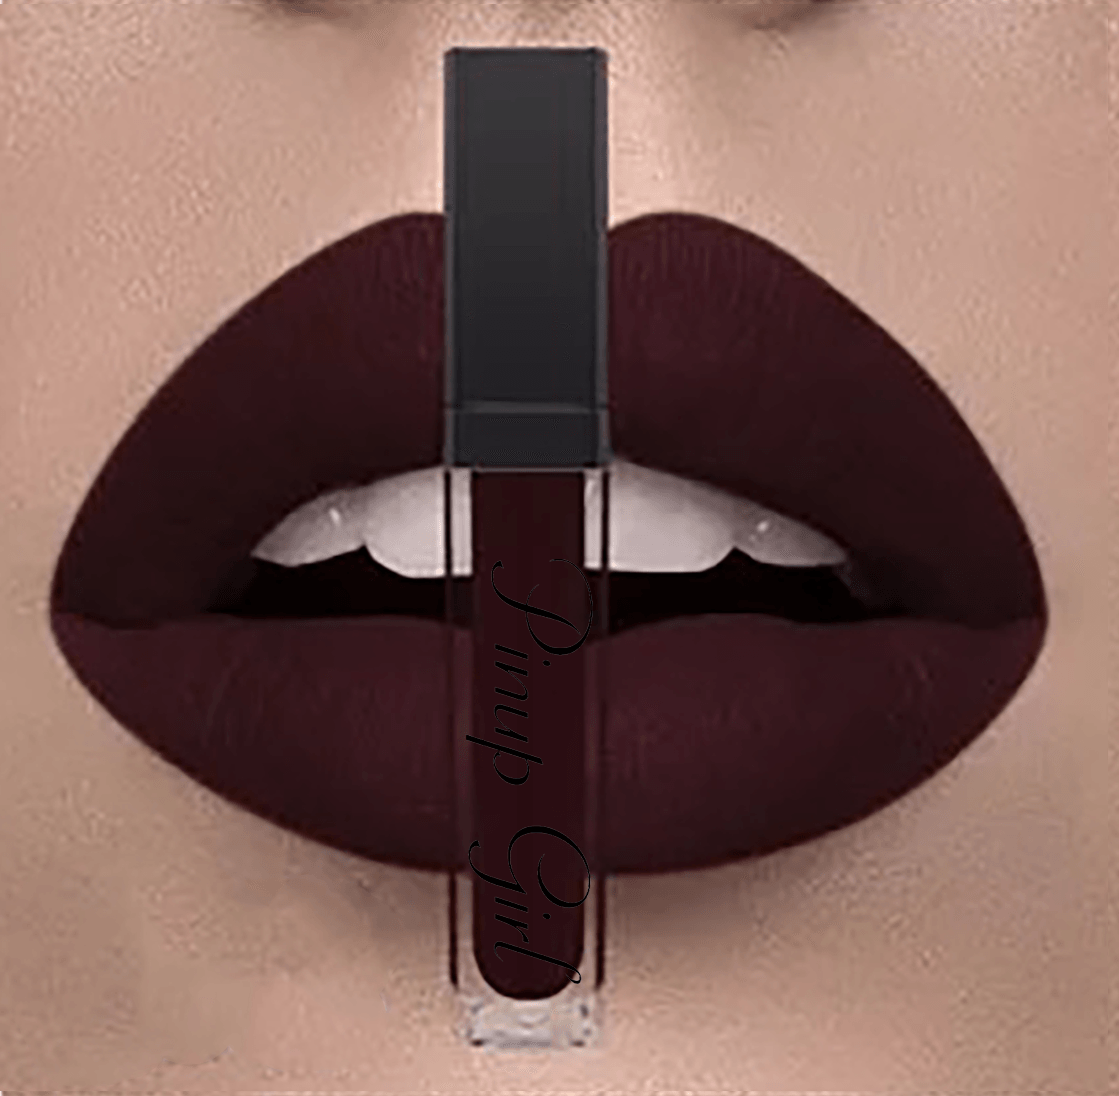 Pictured is a swatch of the Pinup Girl Clothing no smudge liquid matte lipstick in Lilith's Kiss Burgundy